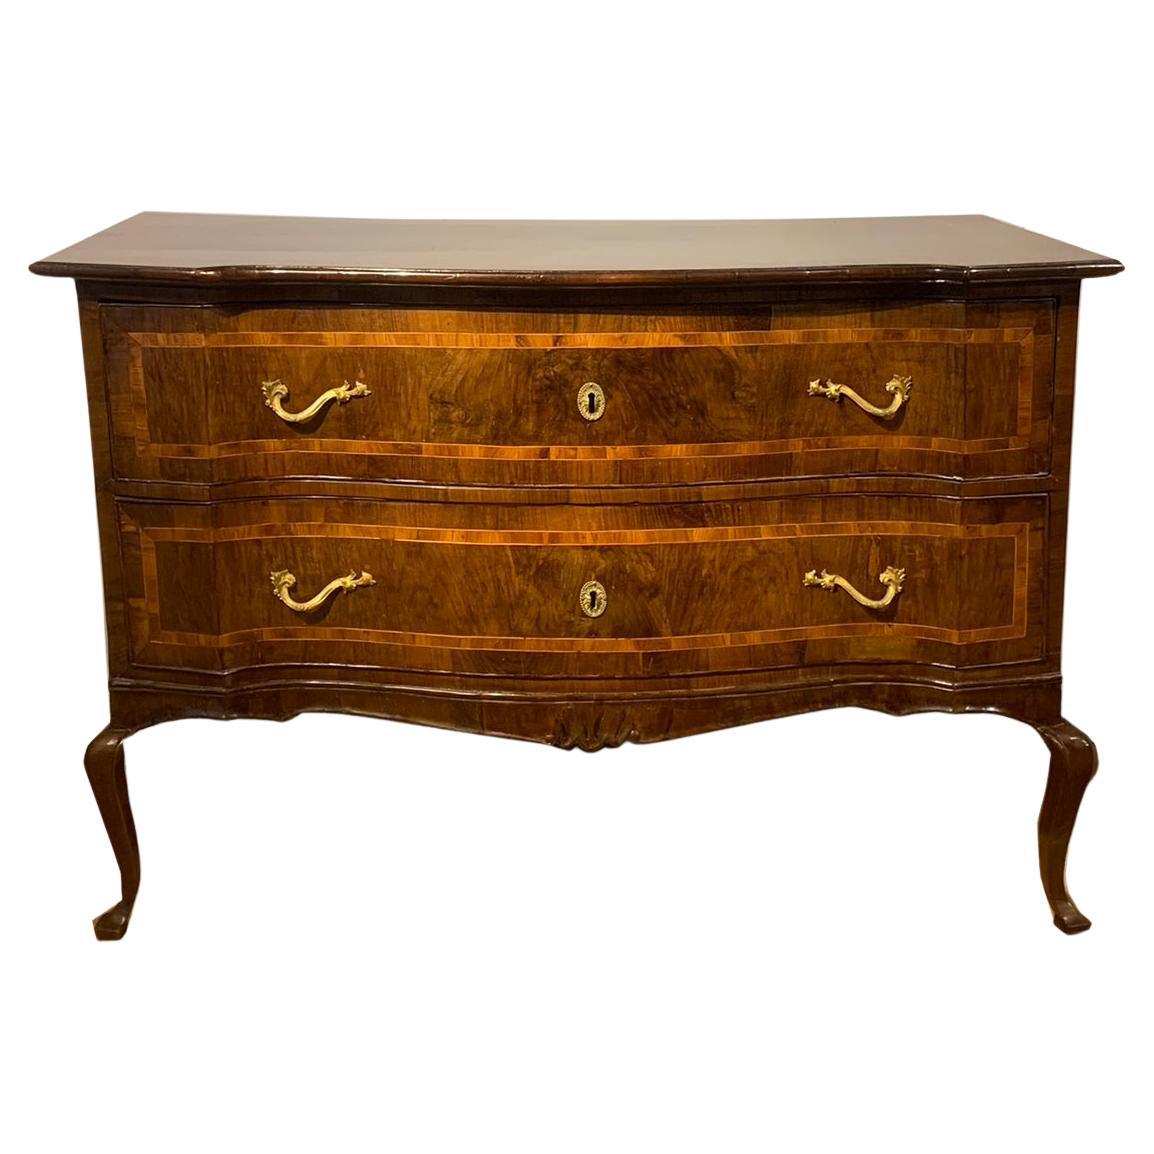 END OF THE 17th CENTURY WALNUT AND CHERRY VENEREED CHEST OF DRAWERS For Sale